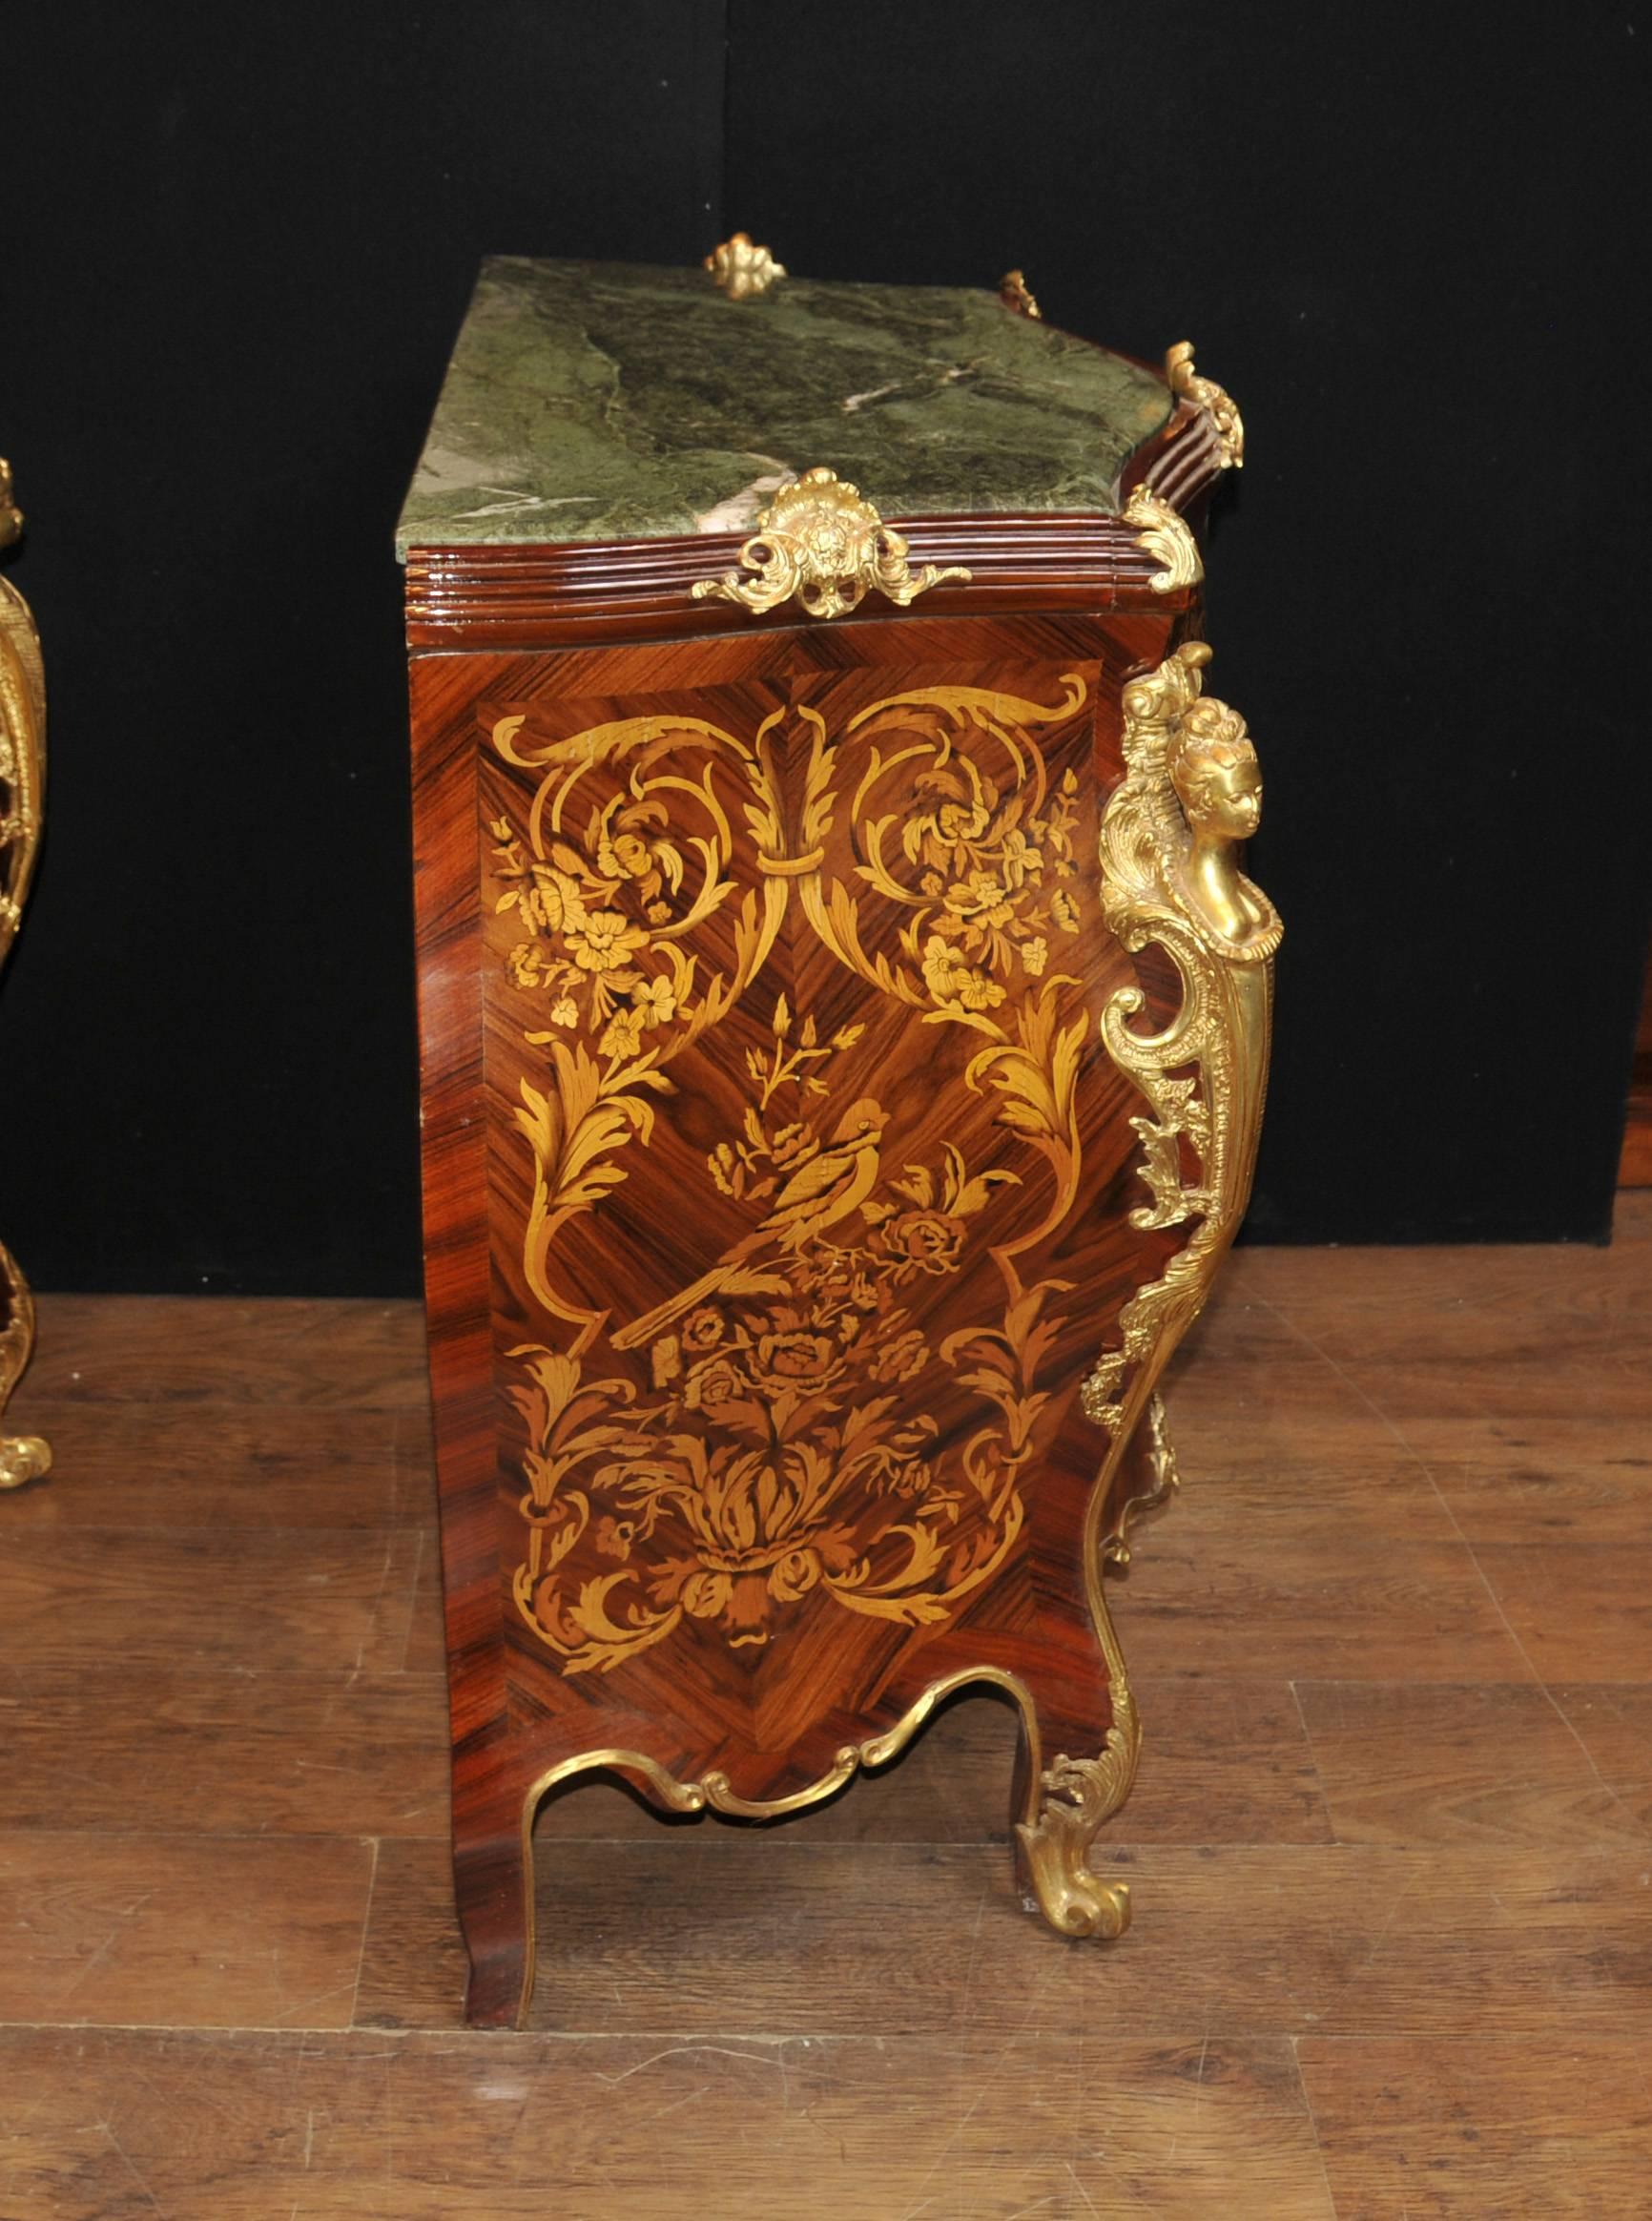 Eye-catching pair of French Louis XVI style commodes of bombe form
The bombe shape refers to the exaggerated curves to sides and front
Ormolu fixtures are incredible with great patina including female busts to side, legs and sabots
Three drawers